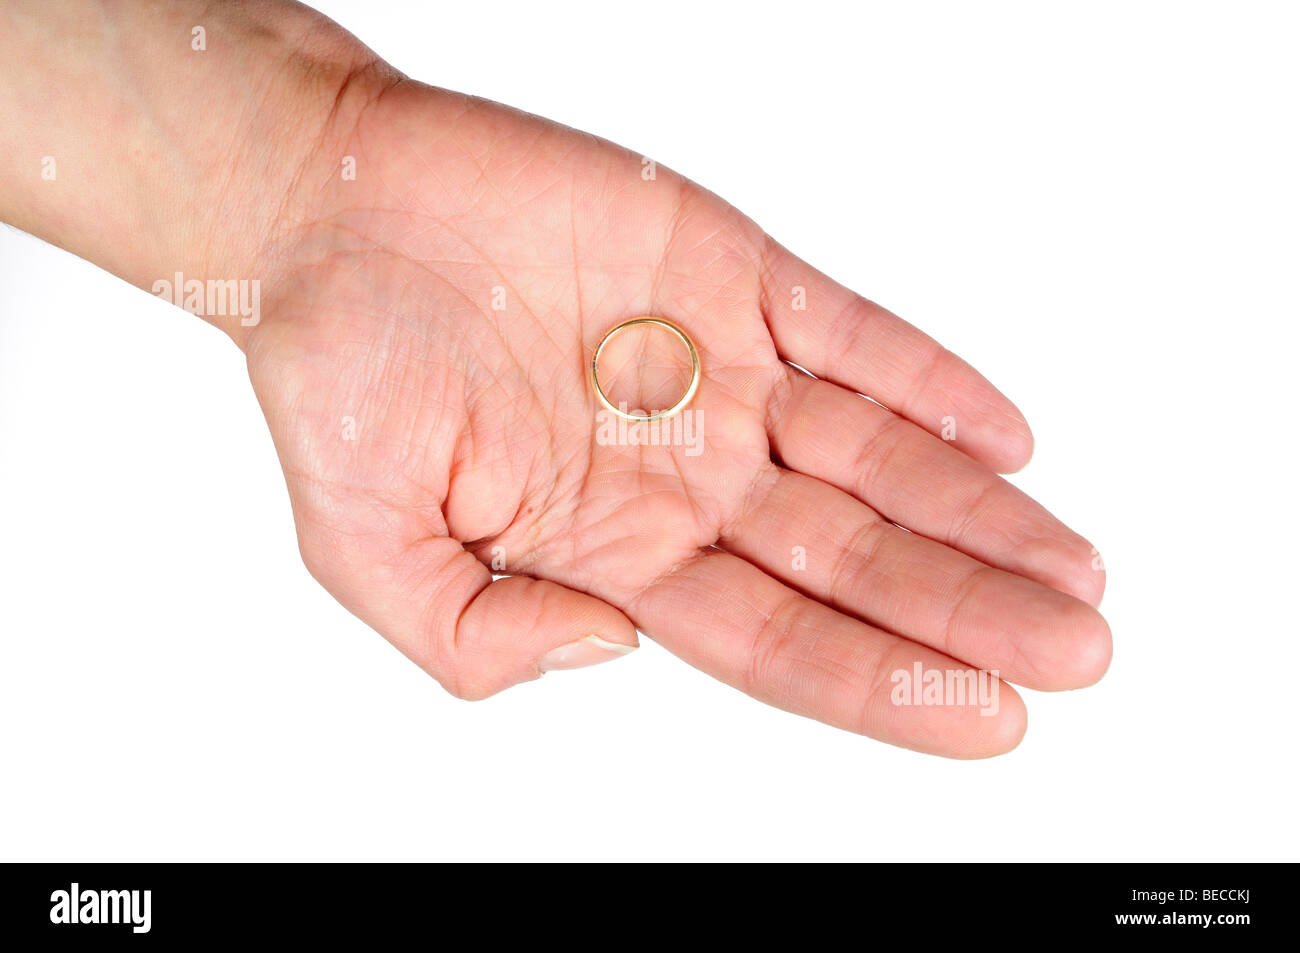 Woman's hand holding a wedding ring in her palm Stock Photo